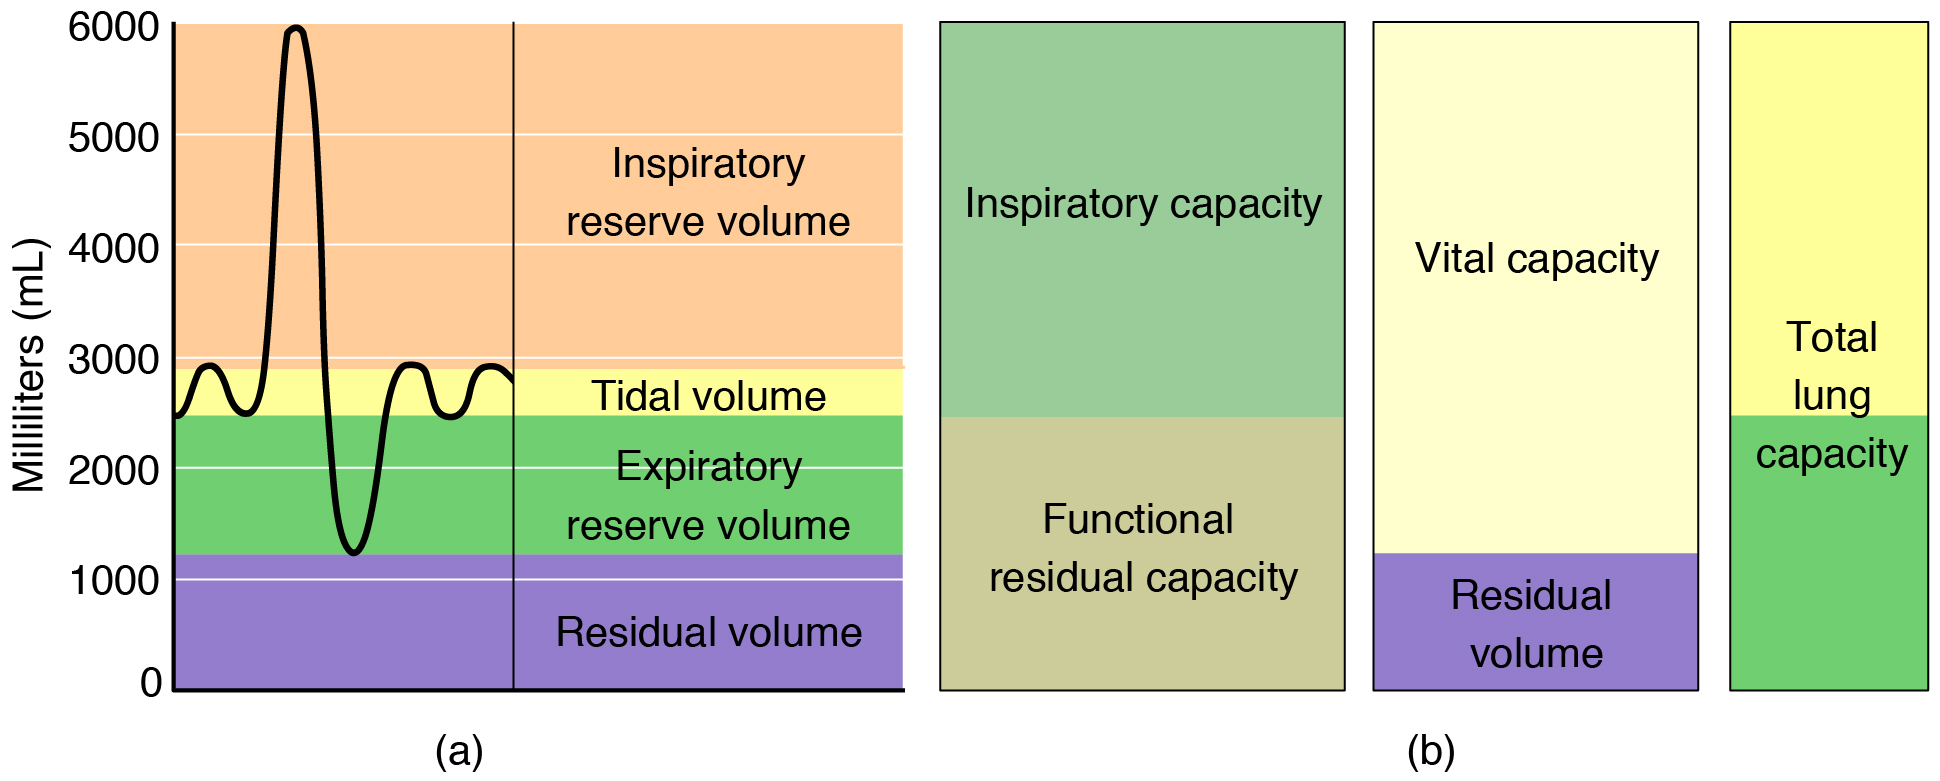 The left panel shows a graph of different respiratory volumes. The right panel shows how the different respiratory volumes result in respiratory capacity.